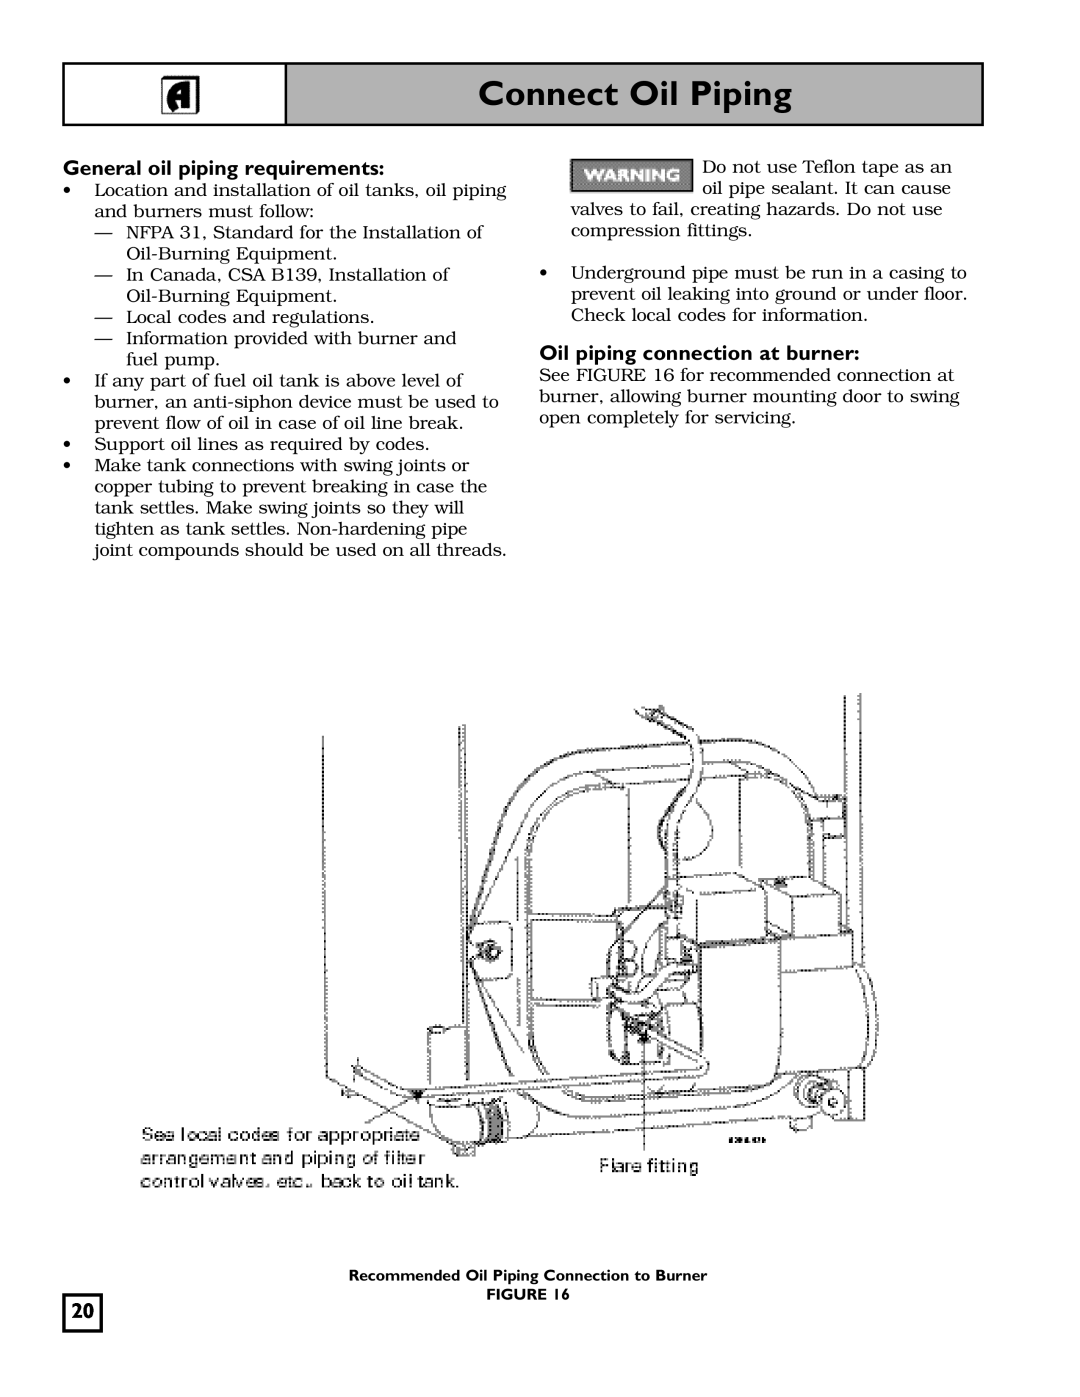 Weil-McLain 550-141-827/1201 manual Connect Oil Piping, General oil piping requirements, Oil piping connection at burner 